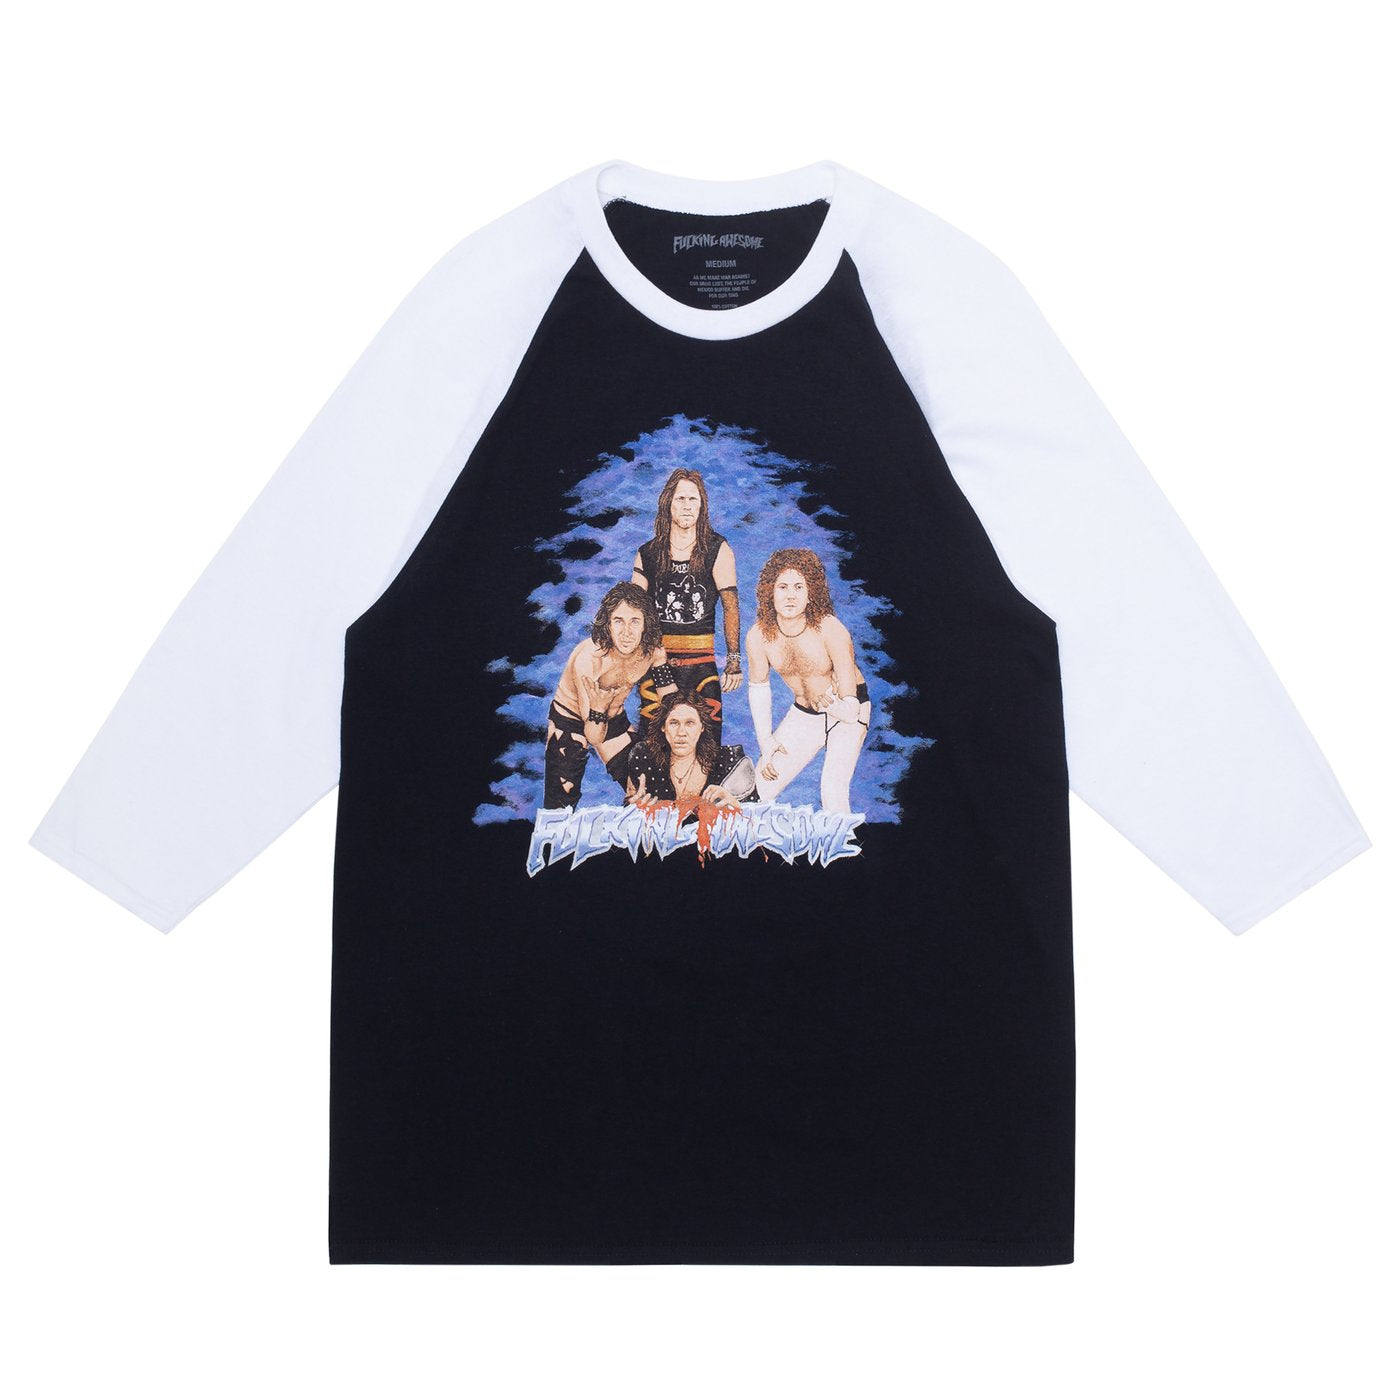 Heavy Metal Baseball 3/4 Tee Wht/Blk (size options listed)